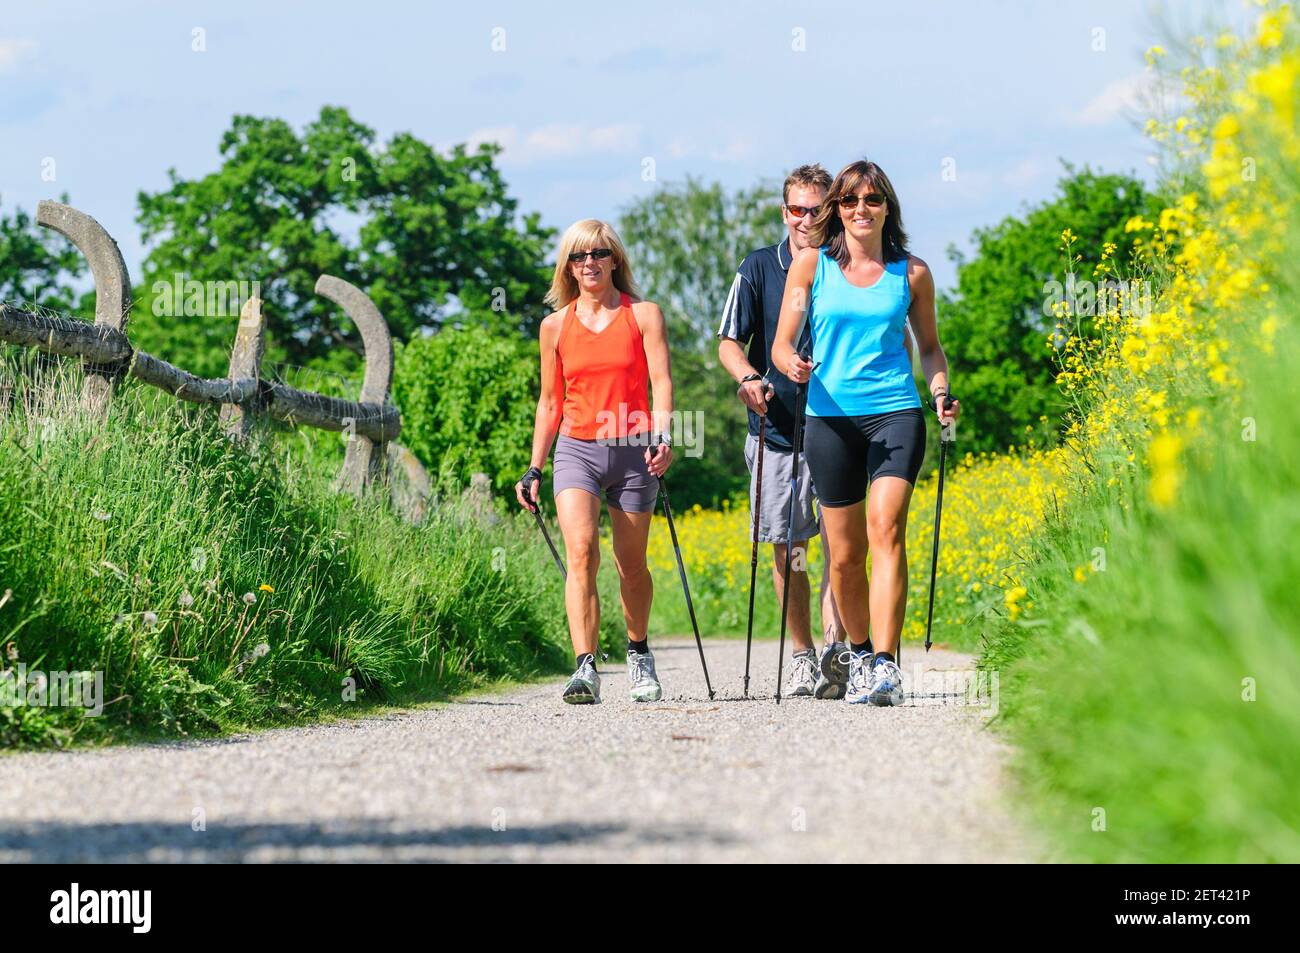 Nordic Walking session in springtime nature Stock Photo